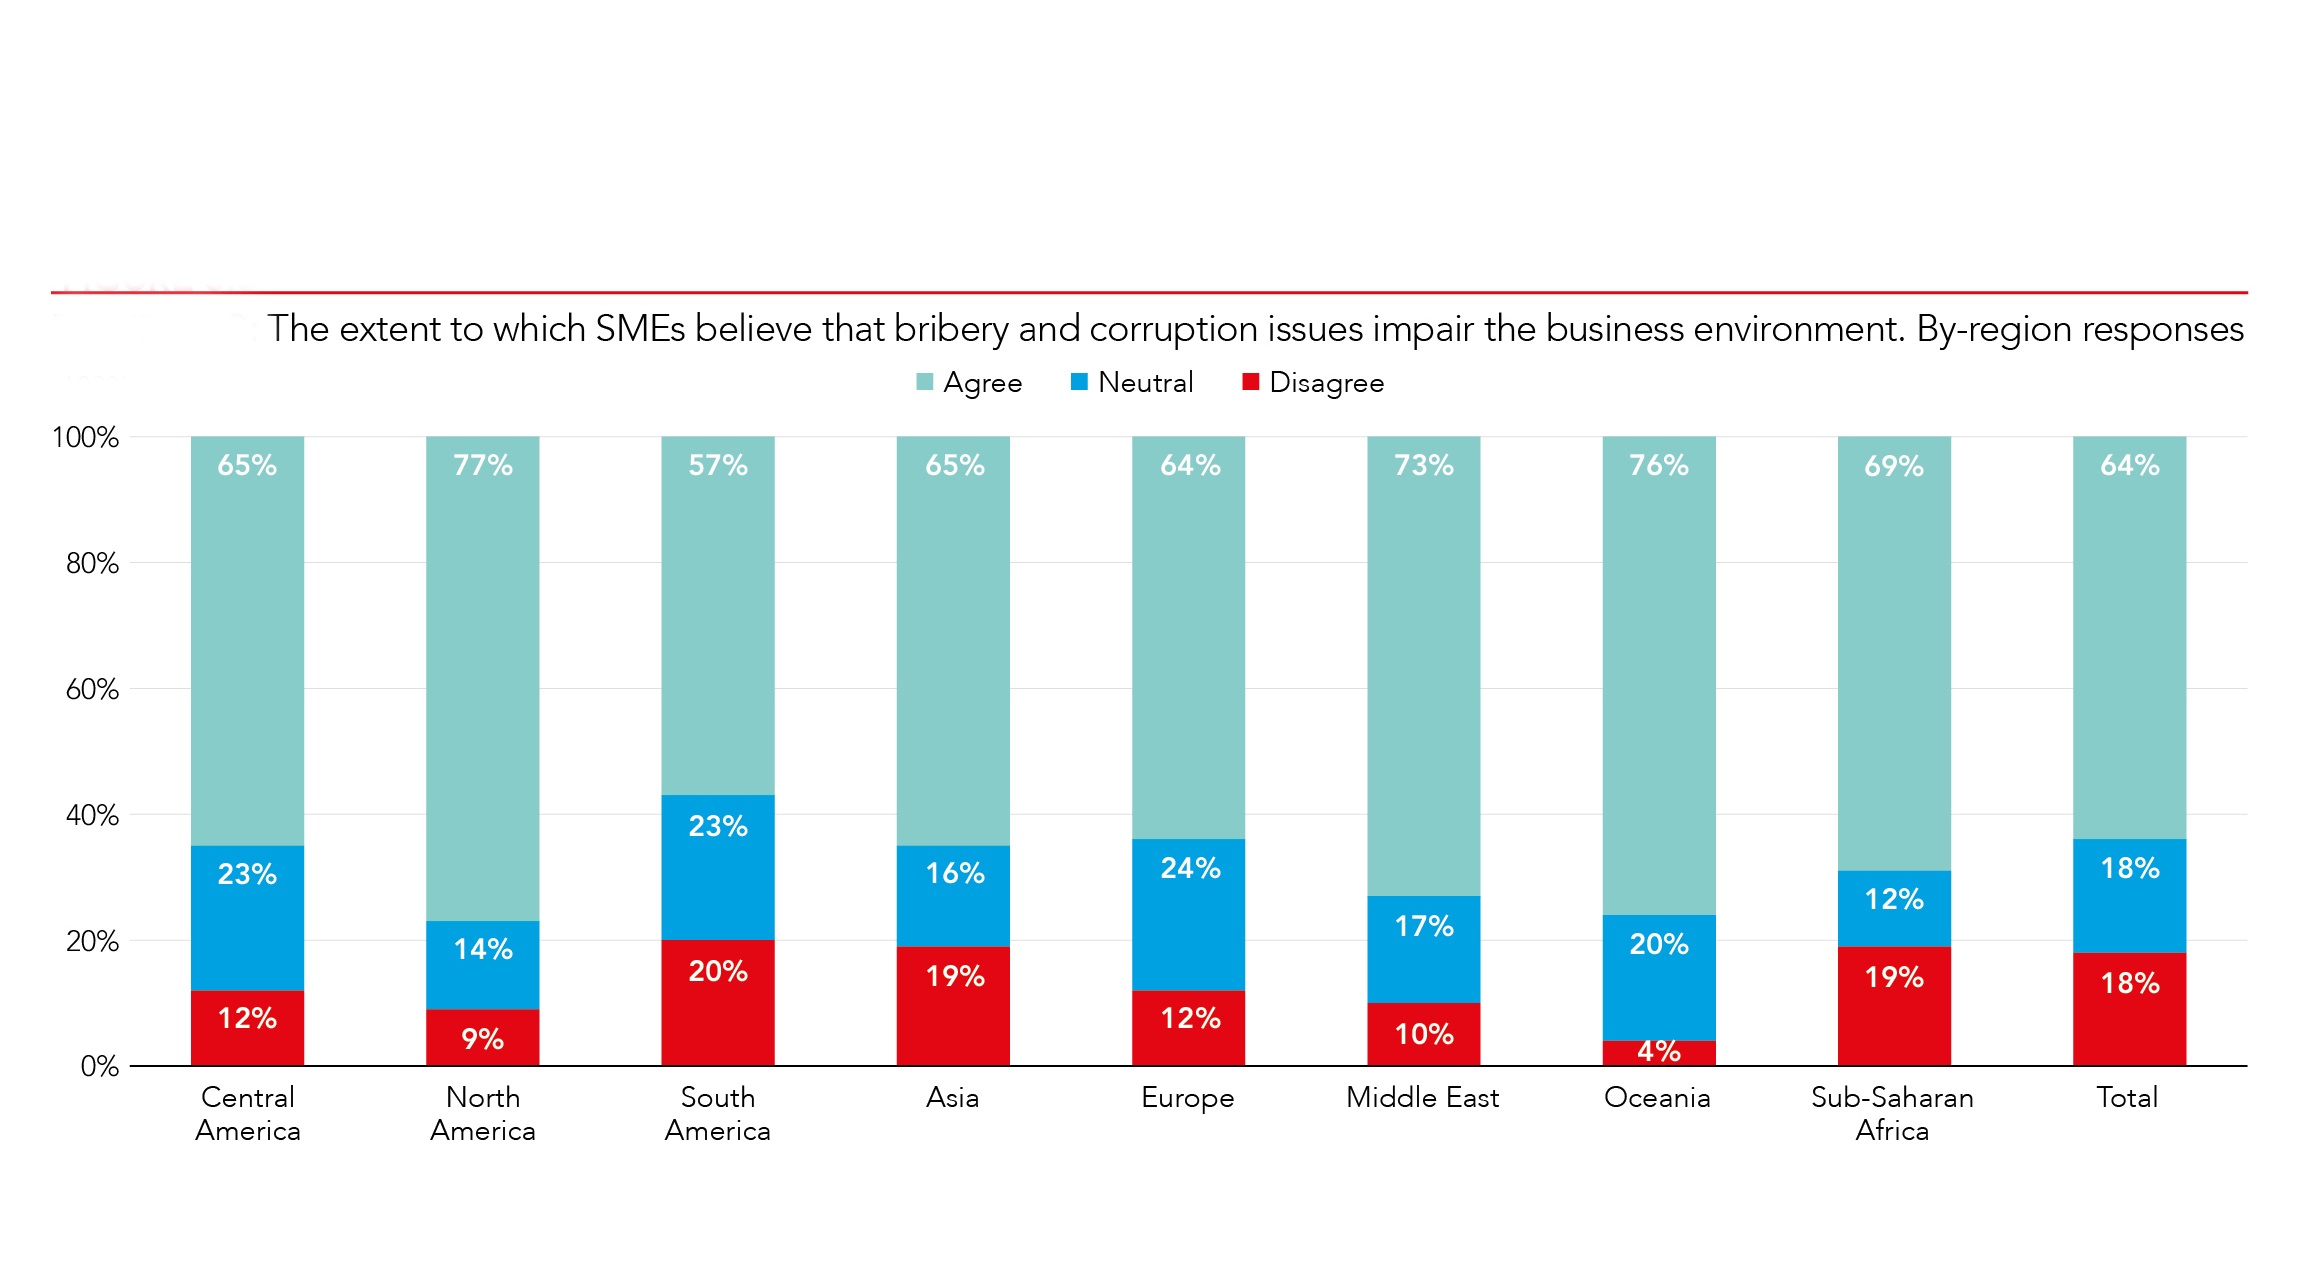 The majority (67%) of global survey respondents think that SMEs are not generally likely to come across any risk of bribery and corruption in the course of their business dealings, although this figure masks significant regional variations. Only in Central America did respondents who claimed that SMEs would not encounter bribery and corruption outnumber those who thought it likely, at 37% to 27%, whereas in sub-Saharan Africa the results were 10% to 86%.